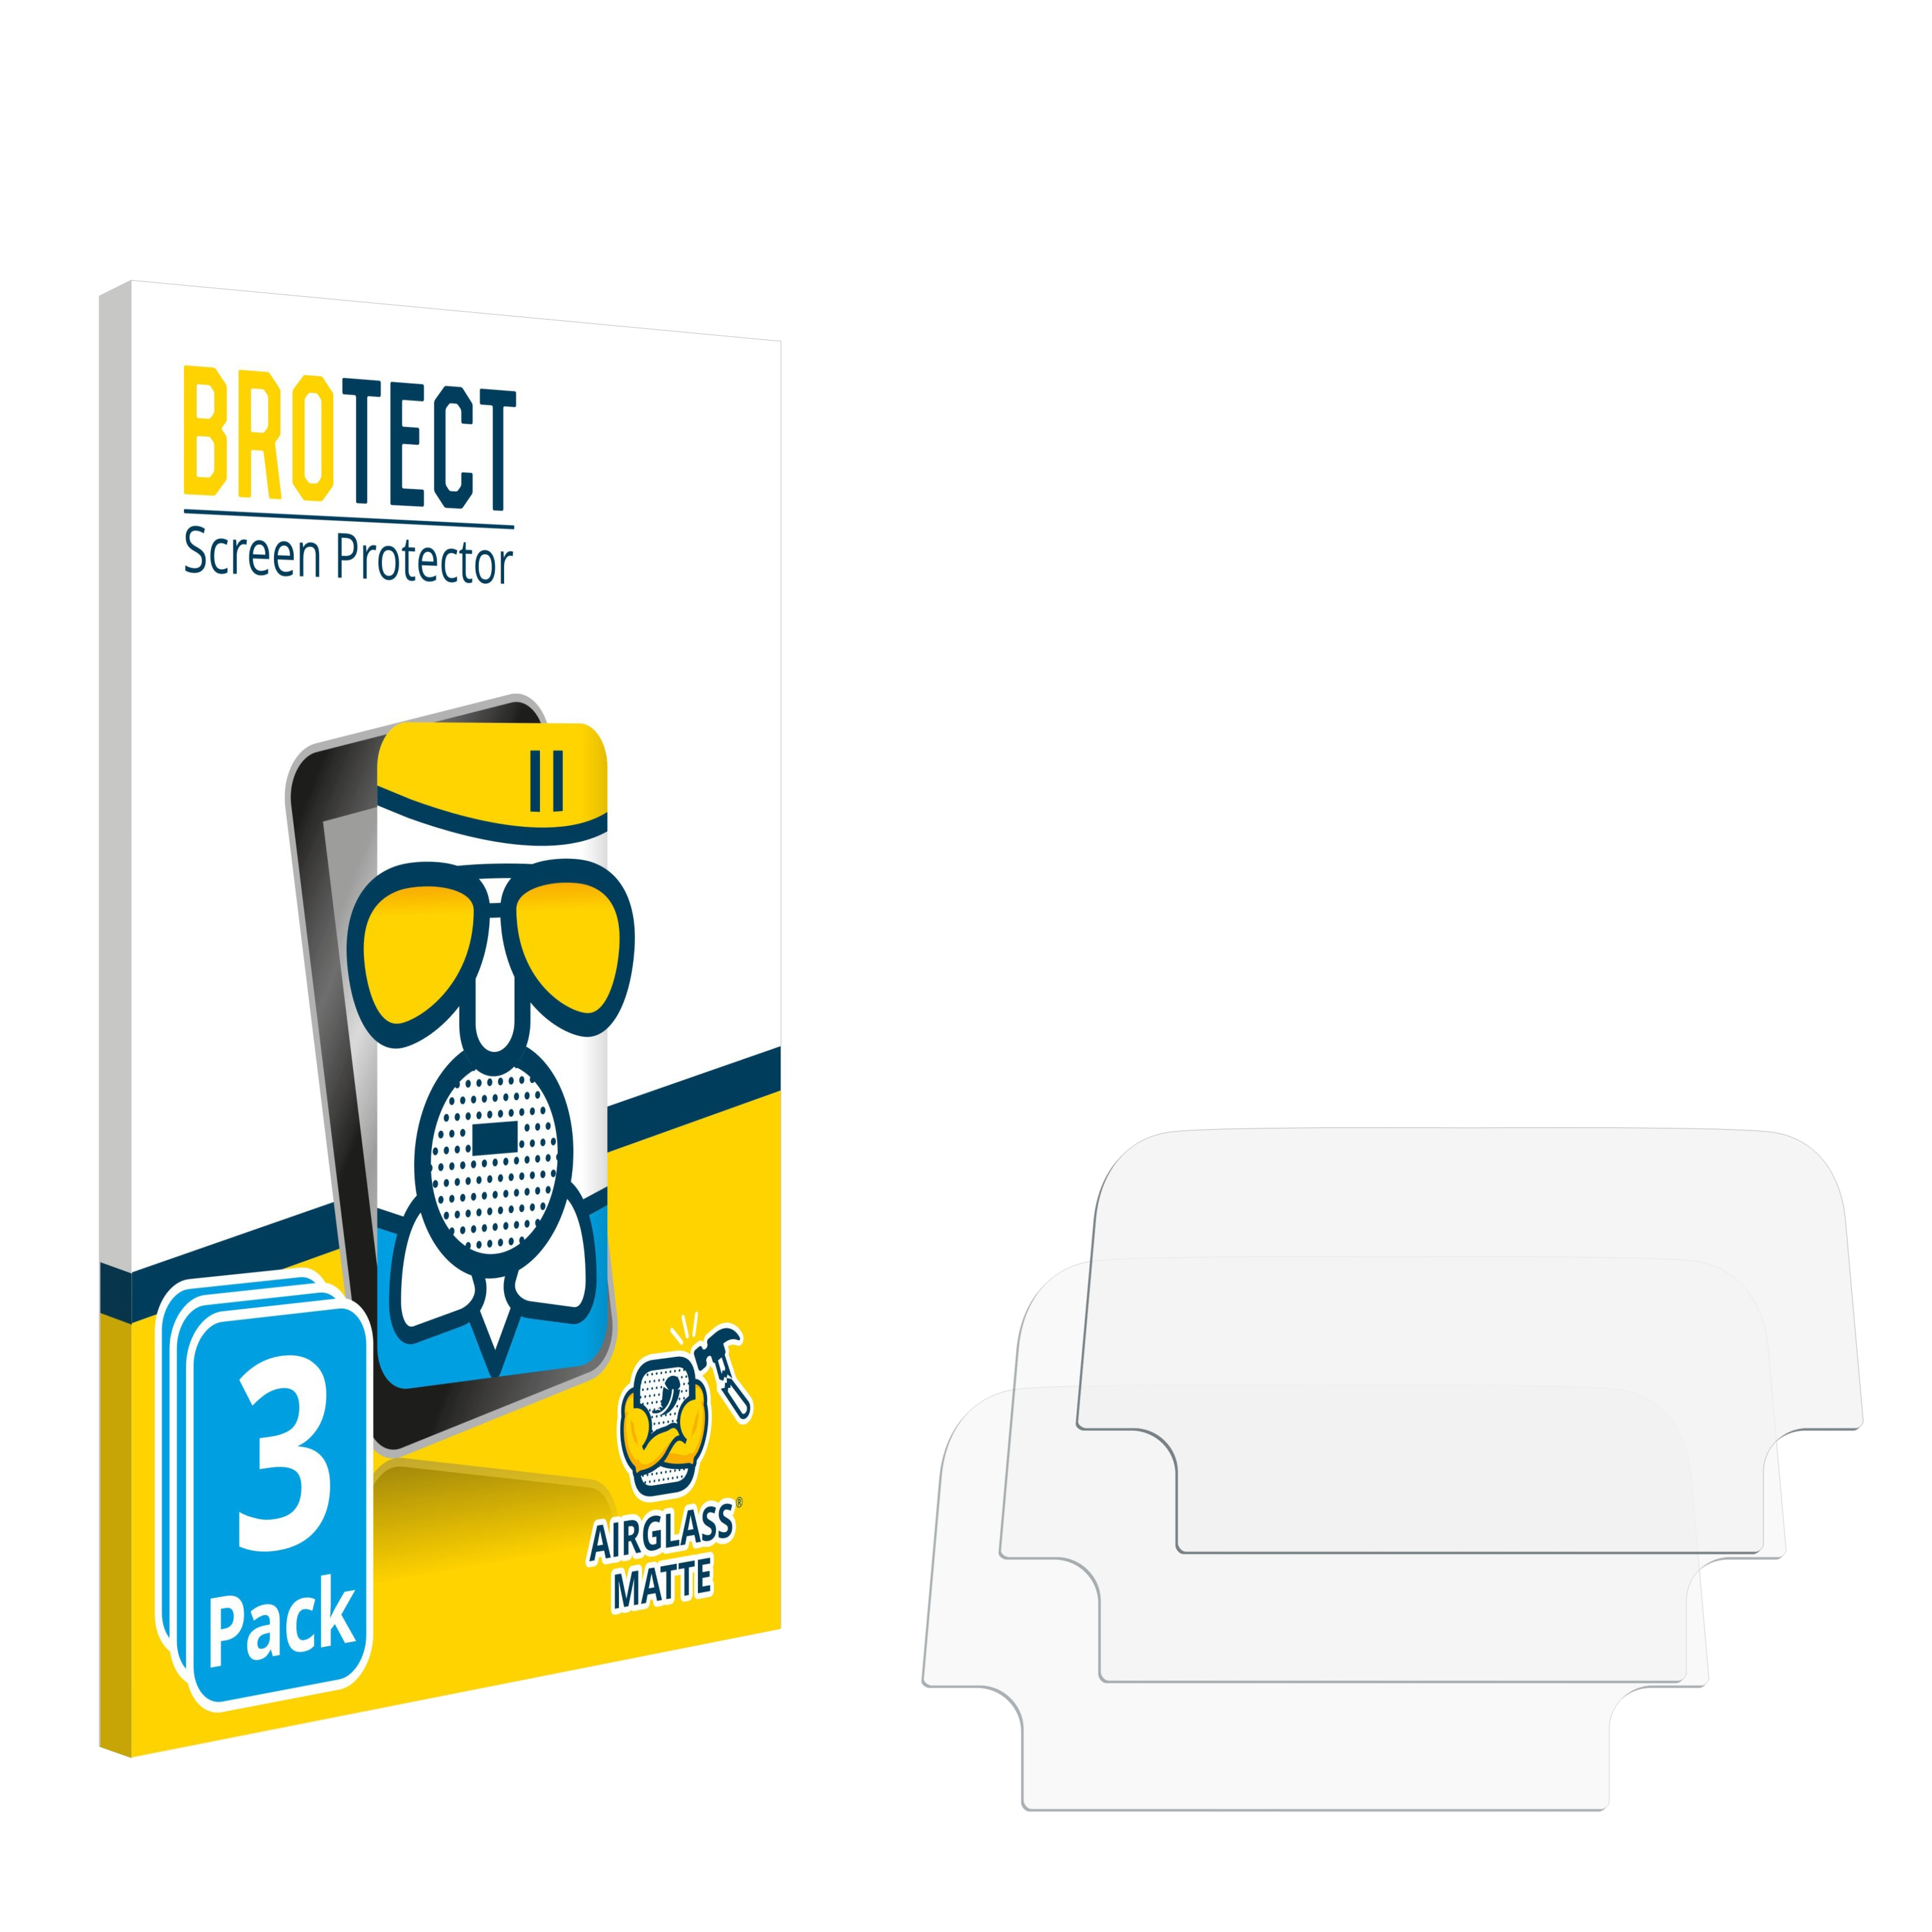 BROTECT 3x Airglass matte Tipo Fiat Uconnet 7\